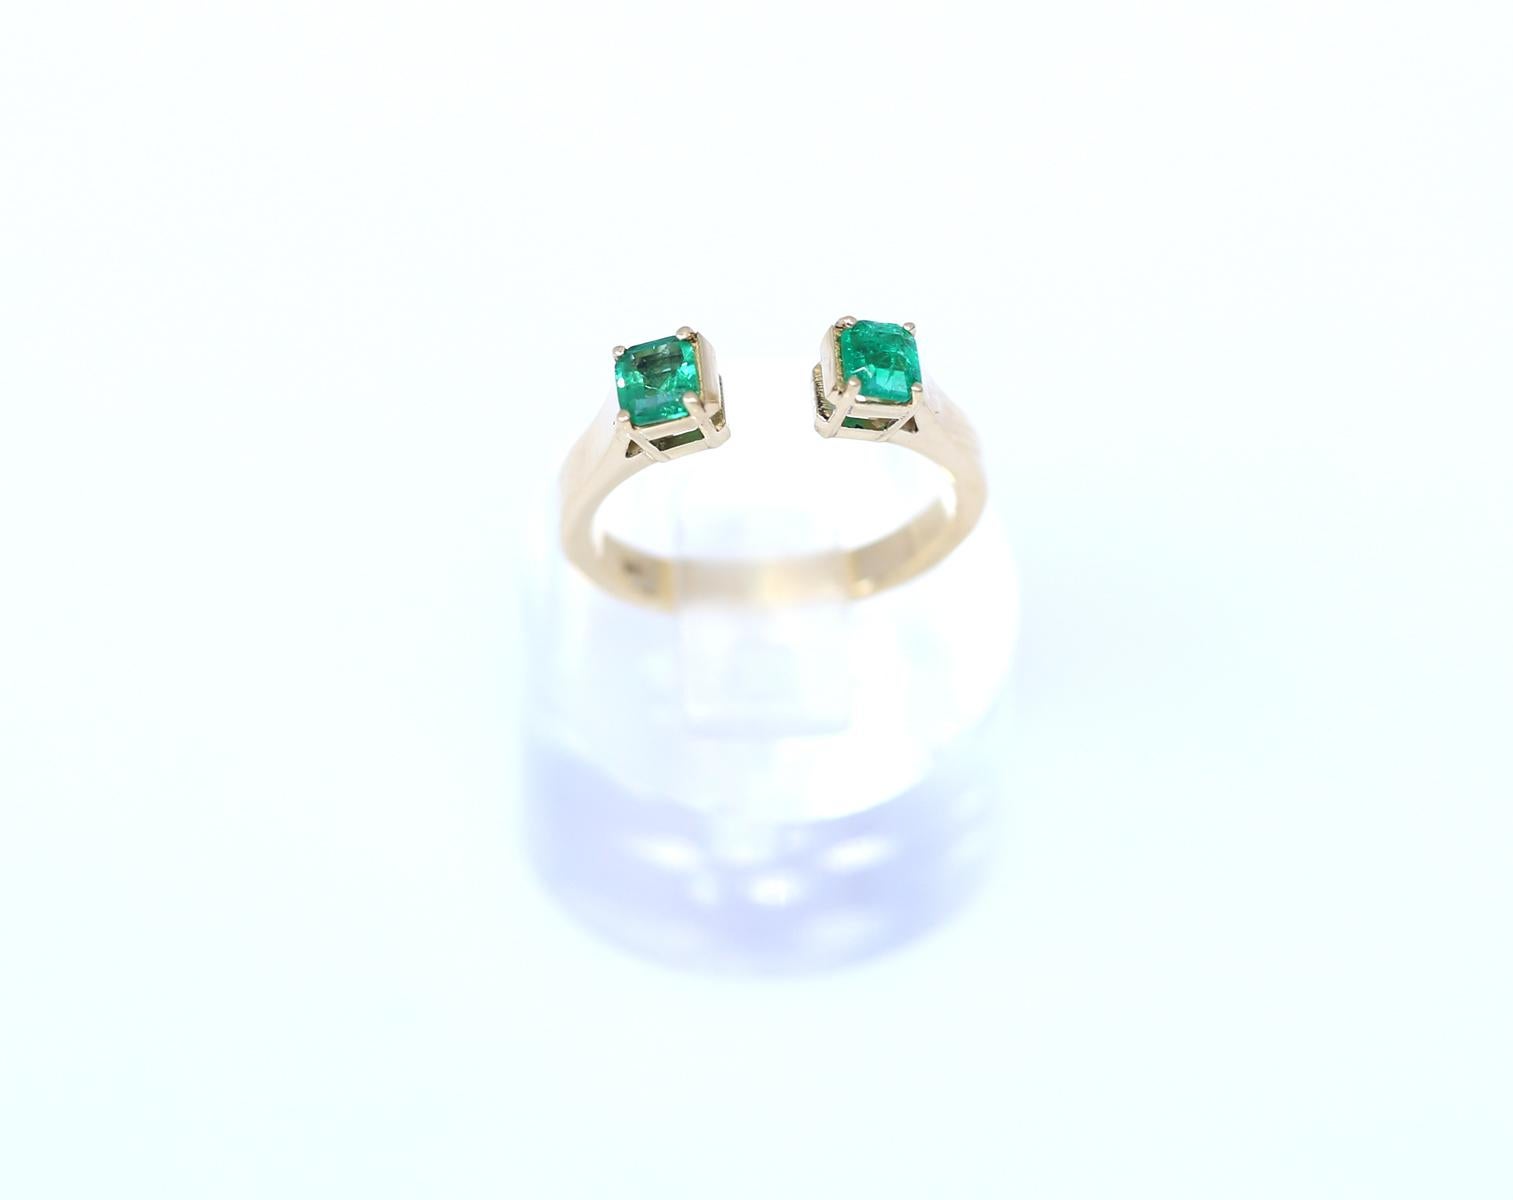 Two square-cut fine casting Emeralds on 18K Yellow Gold Ring horseshoe shape.
Very unusual design when two square-shaped Emeralds are embracing a finger. When looking from above it feels like they are levitating around the finger. Modern design yet